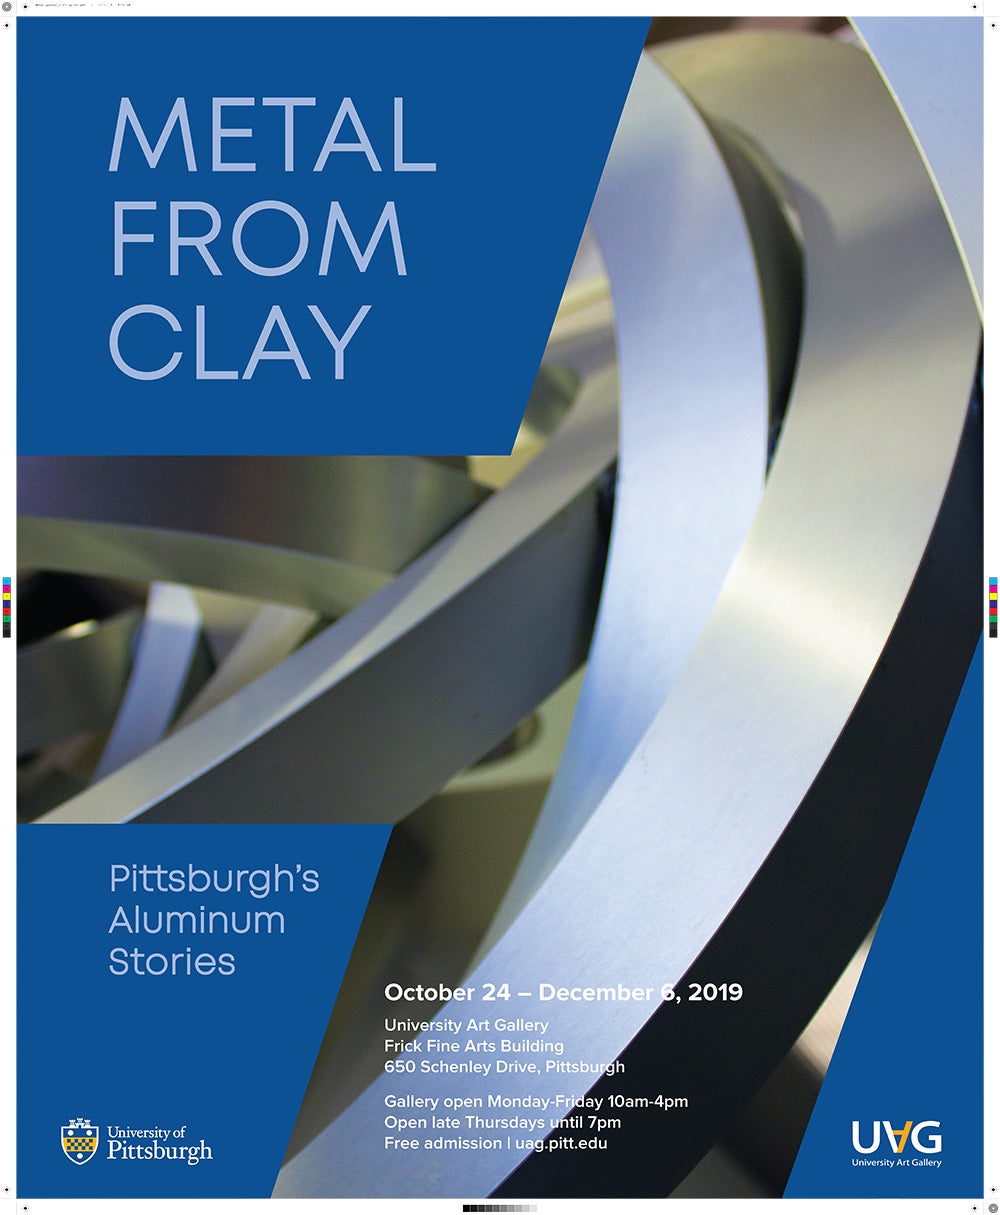 University Art Gallery Exhibition Metal from Clay: Pittsburgh’s Aluminum Stories